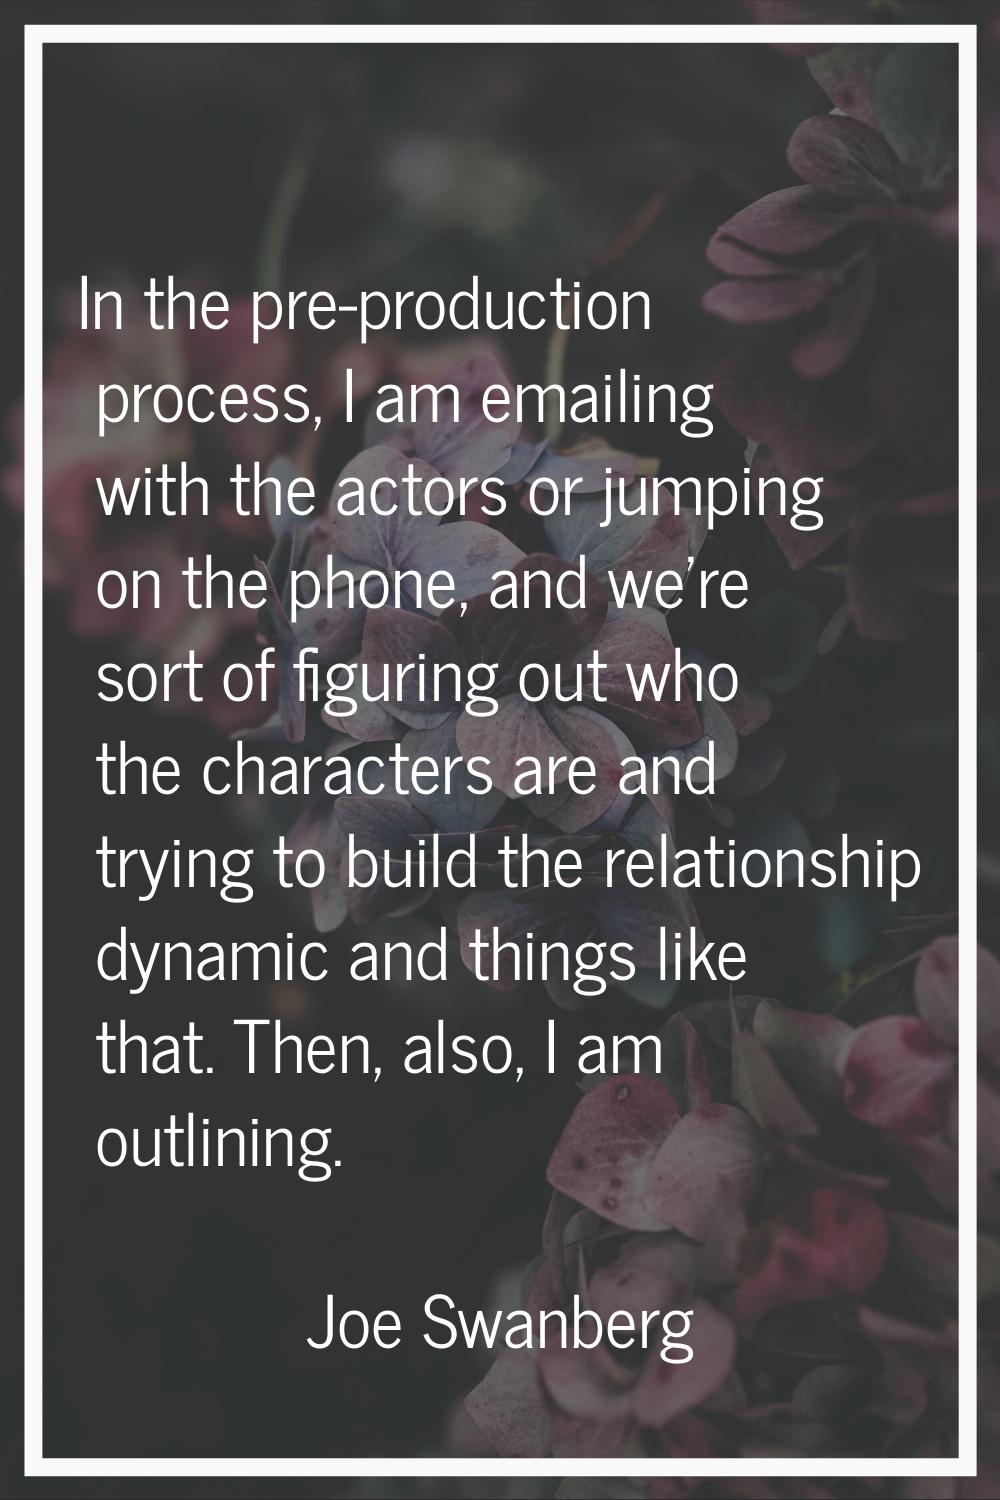 In the pre-production process, I am emailing with the actors or jumping on the phone, and we're sor